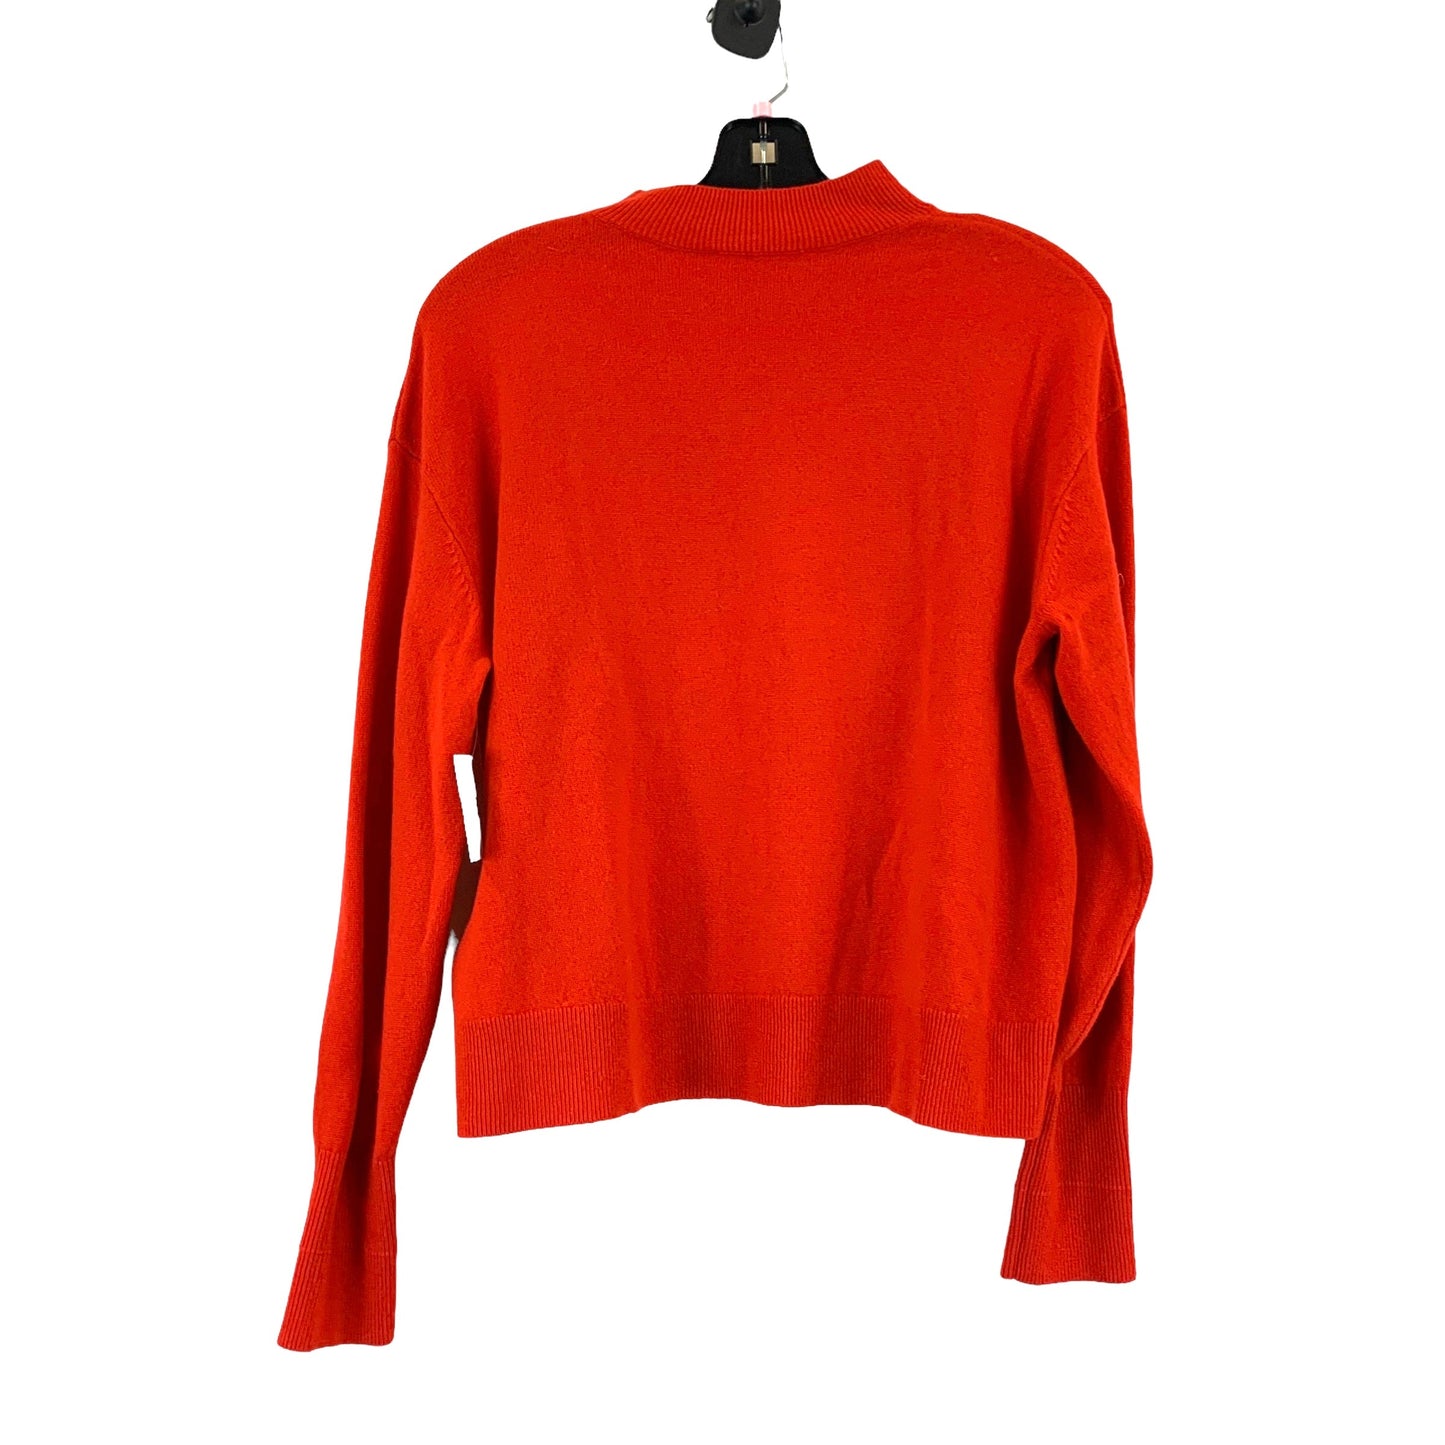 Sweater Cashmere By Everlane  Size: S